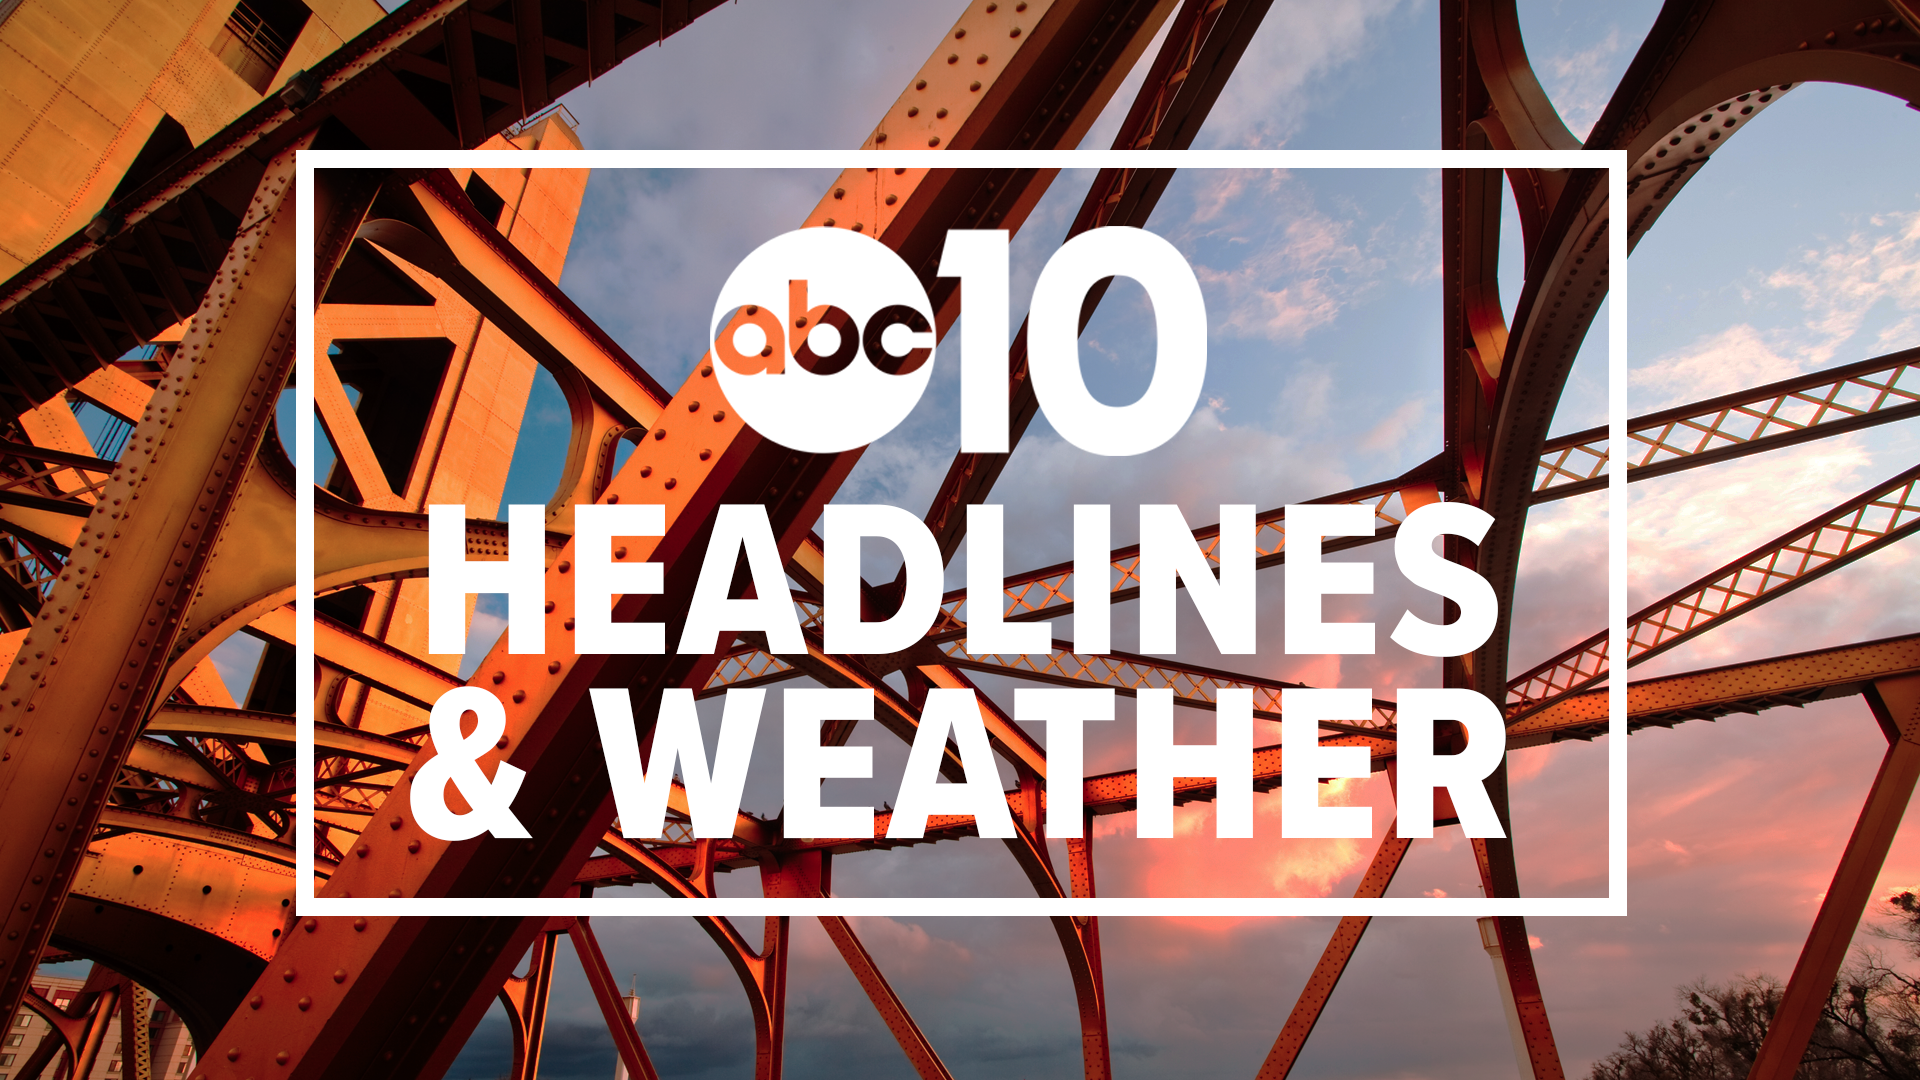 Evening Headlines: October 13, 2019 | Catch in-depth reporting on #LateNewsTonight at 11 p.m. | The latest Sacramento news is always at www.abc10.com